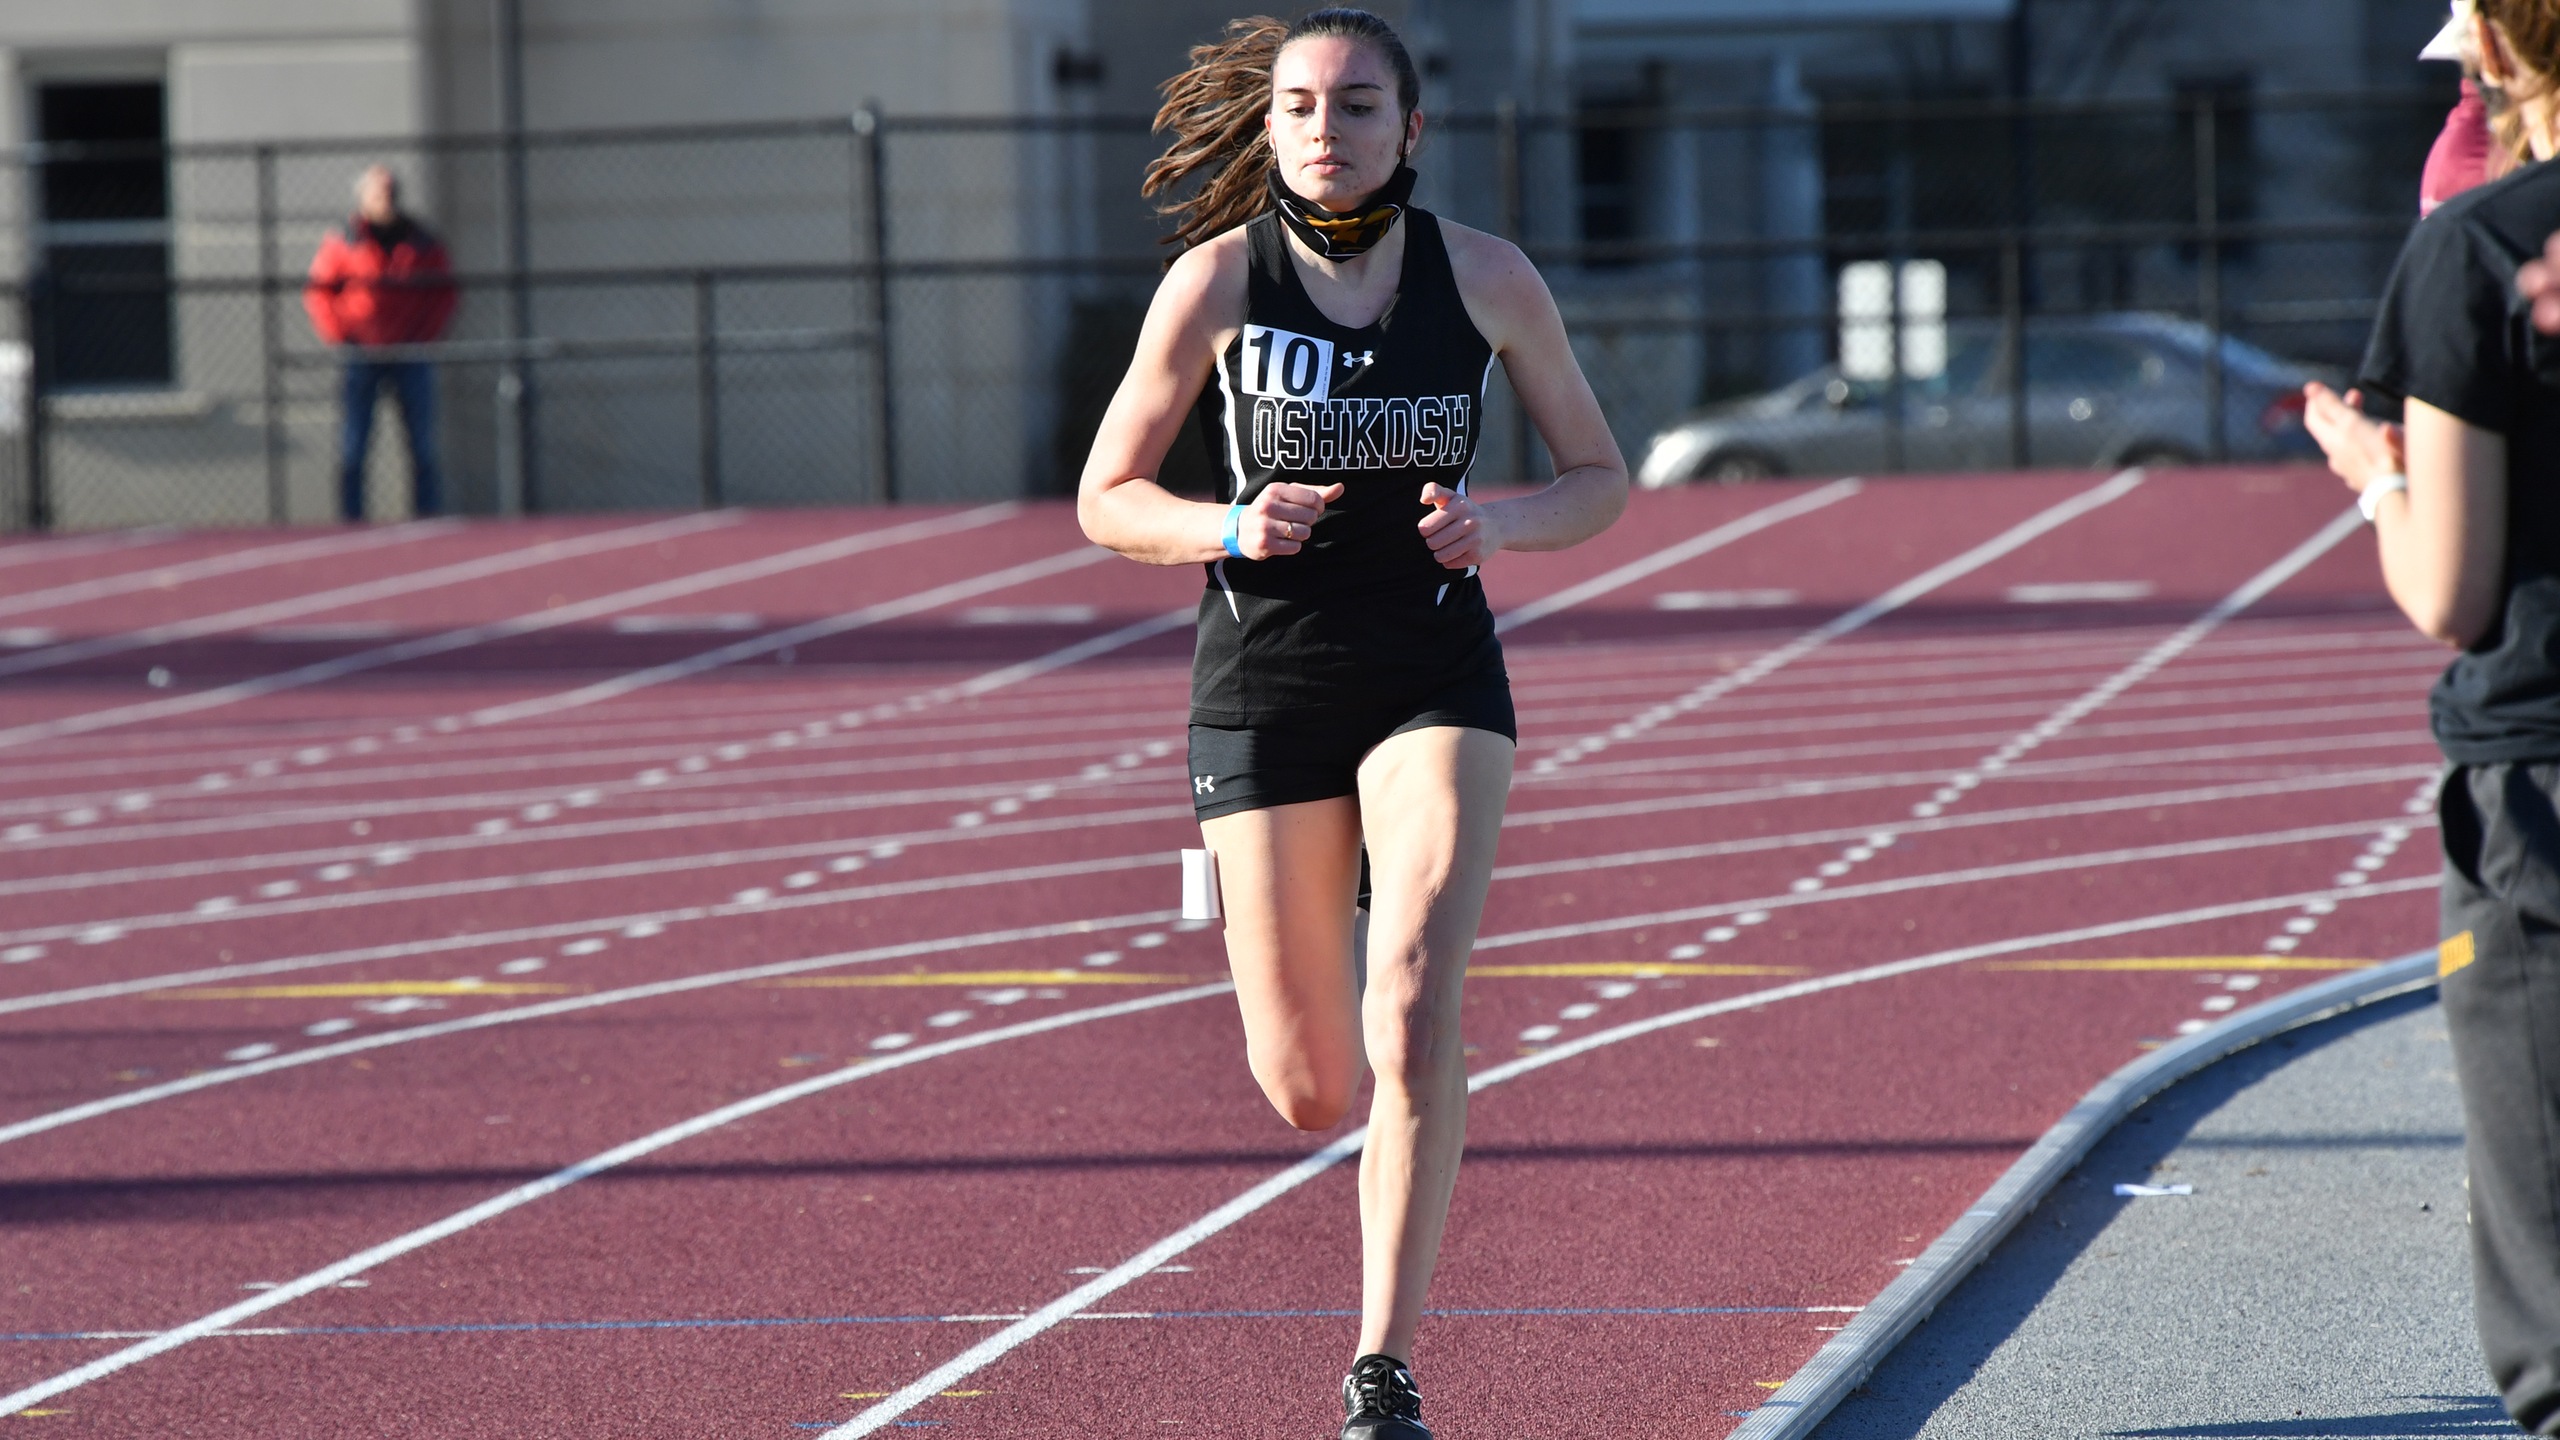 The Titans had six of the top-eight competitors in the 1,500-meter run, including Hannah Lohrenz who won the race with a time of 4:53.33.